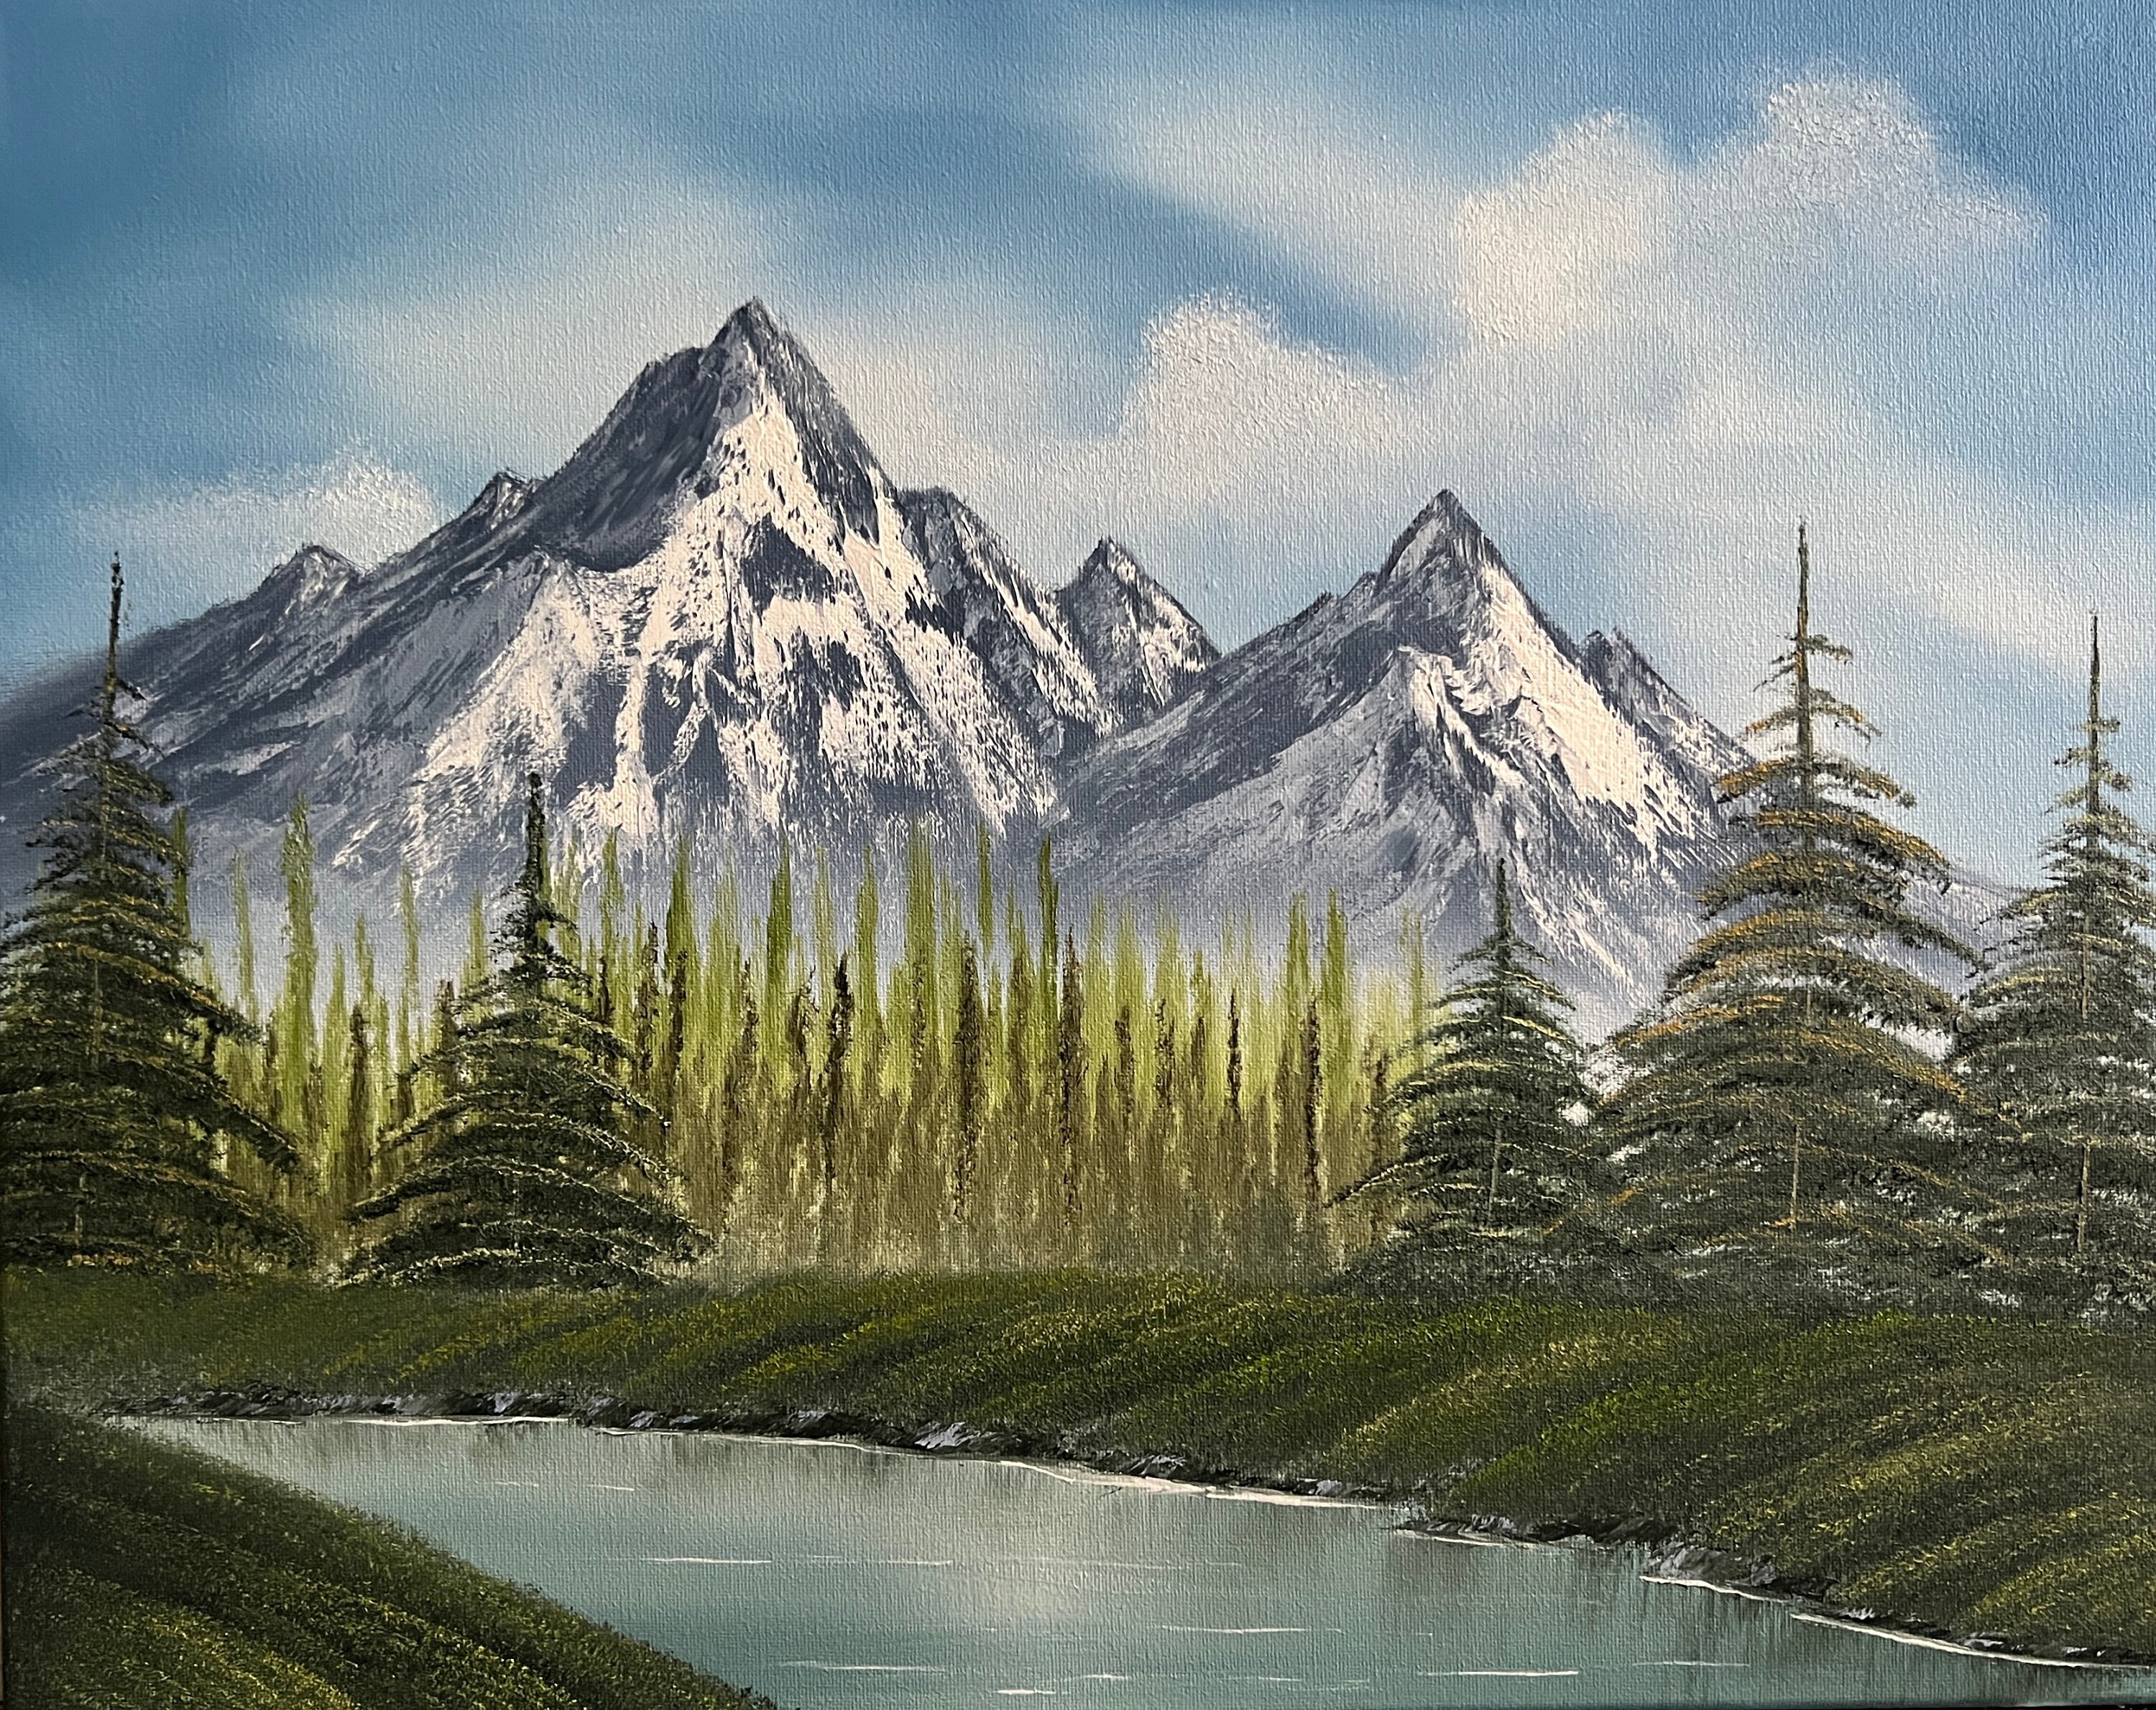 Lakeside Scene Overlooking A Rocky Mountain Range Bob Ross Replica,  Handmade Painting on Stretched Canvas 16x20 